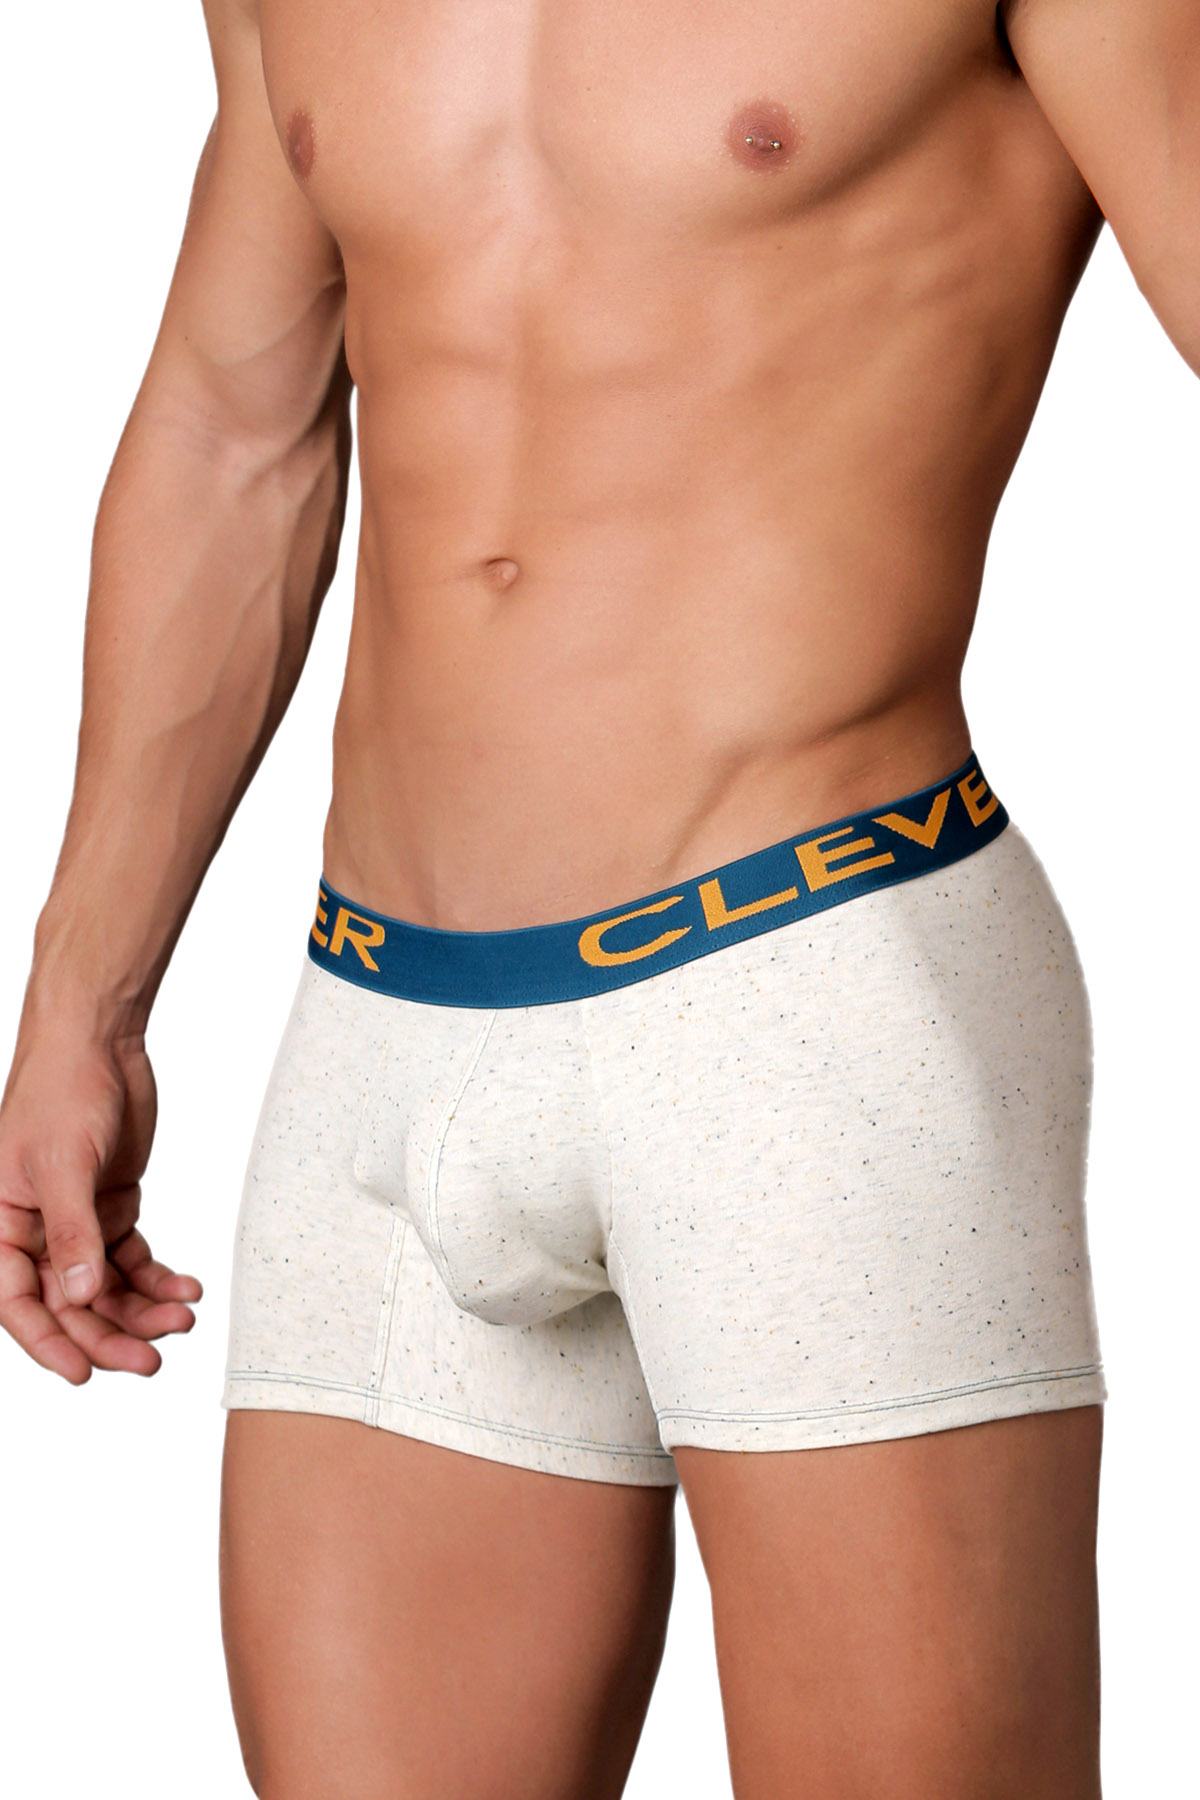 Clever Beige/Teal/Gold Limited Edition Speckled Trunk